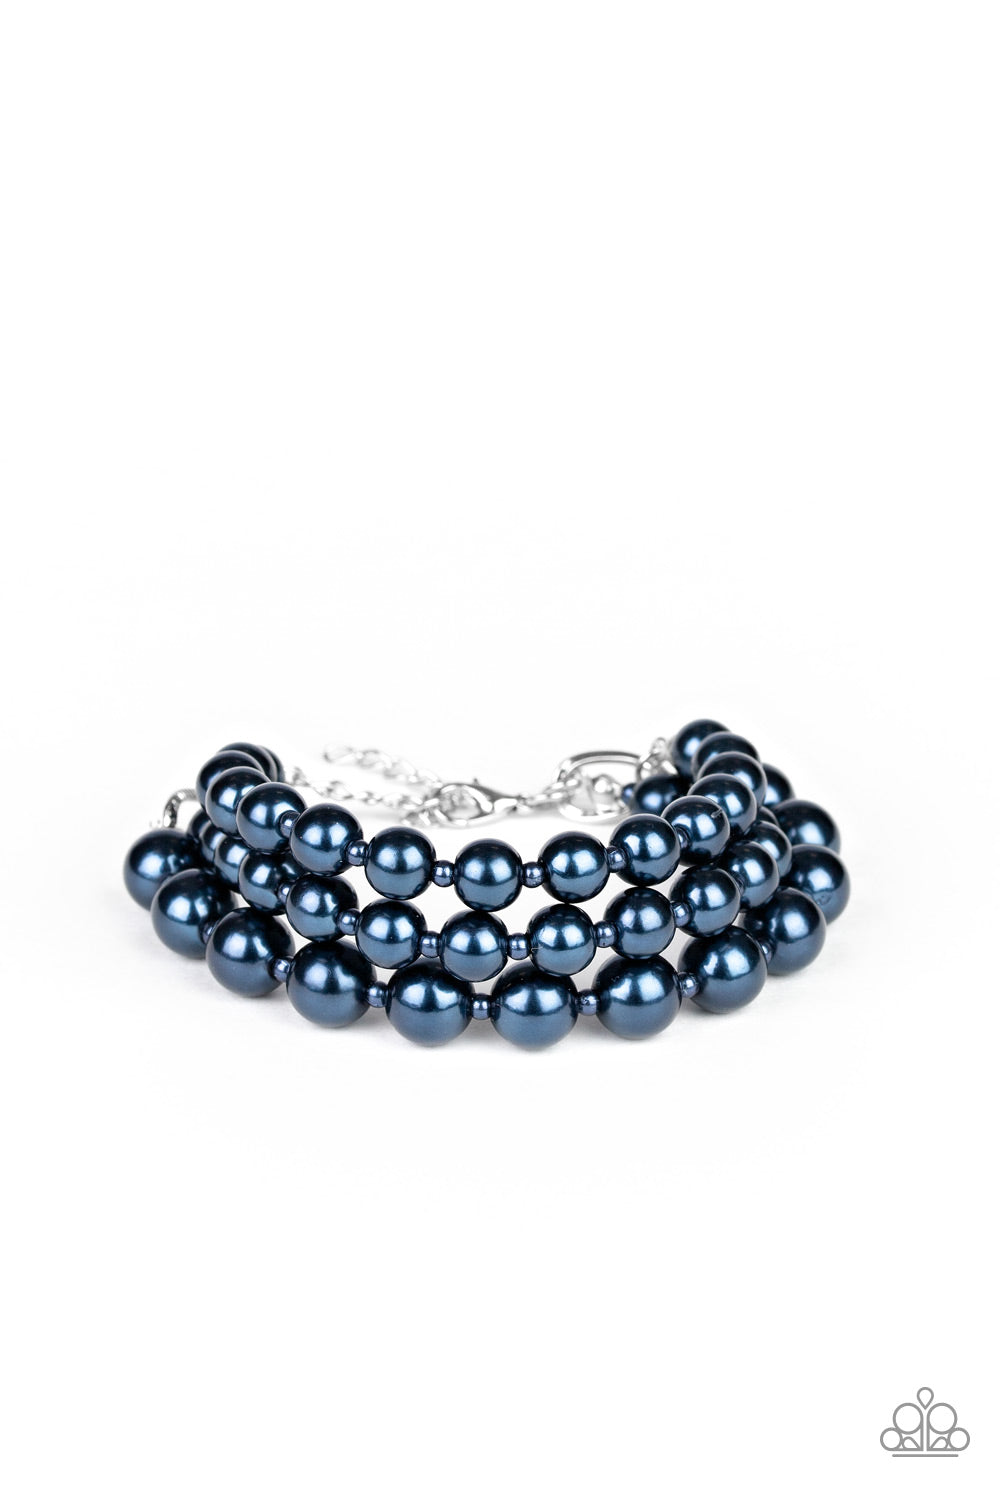 A bubbly collection of blue pearls are threaded along invisible wires, creating refined layers around the wrist. Features an adjustable clasp closure.